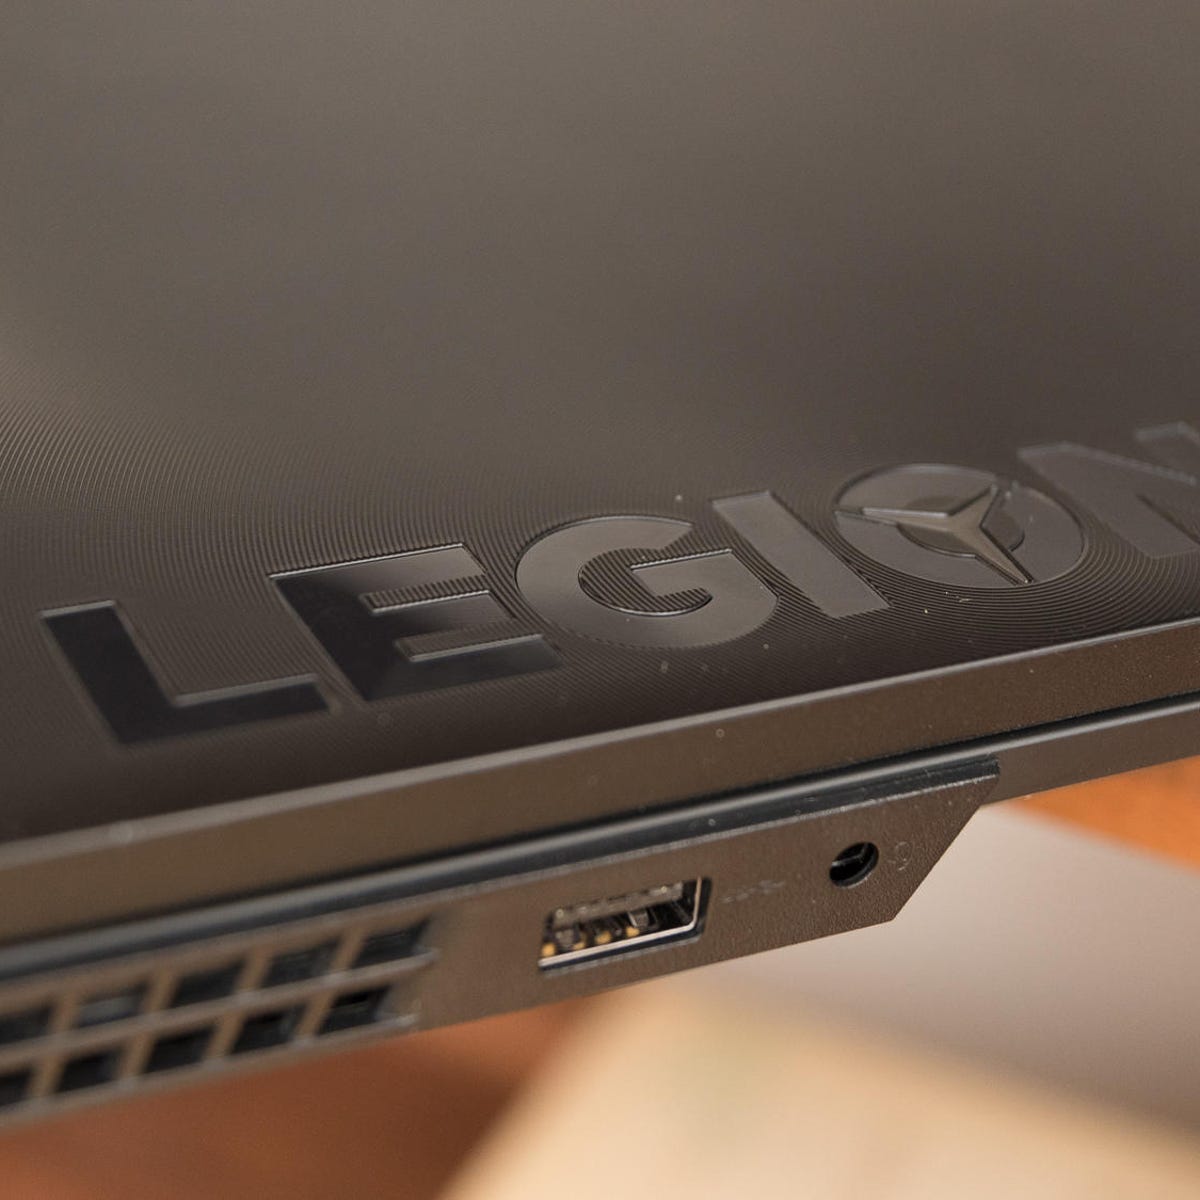 sy vand blomsten Gøre husarbejde Lenovo Legion Y530 review: Part gaming laptop, part ThinkPad, all good -  CNET